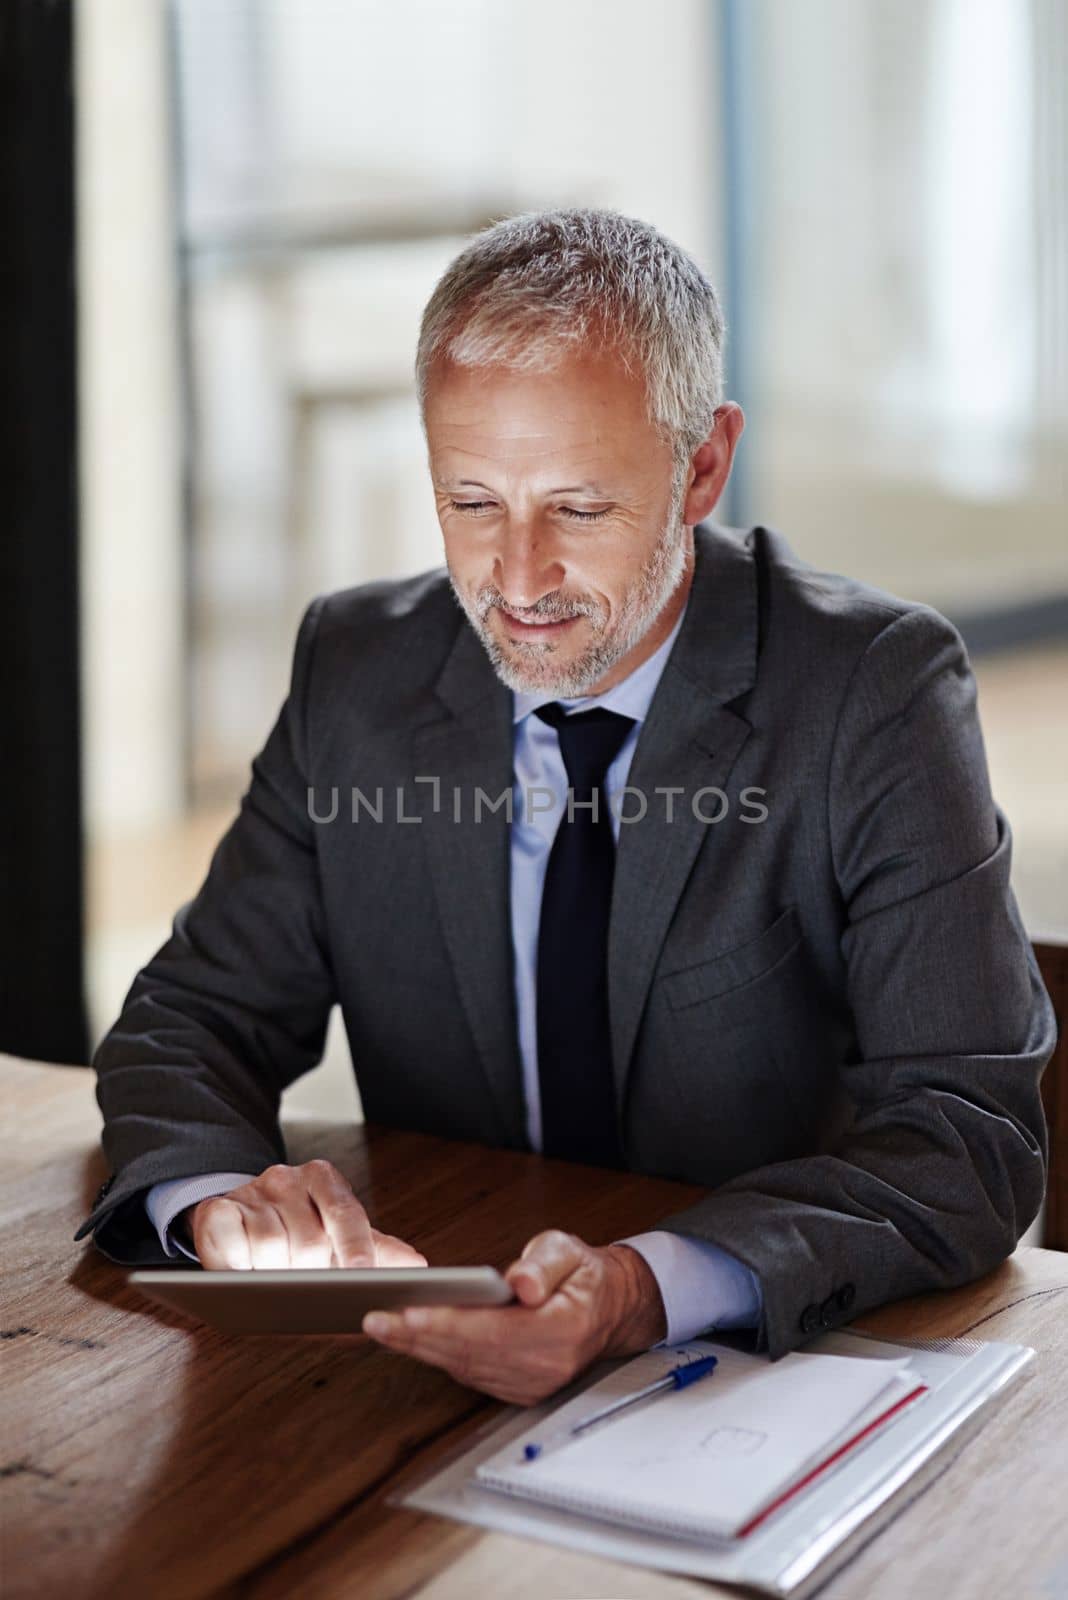 Technology helps him keep track of business. a mature businessman using a digital tablet in an office